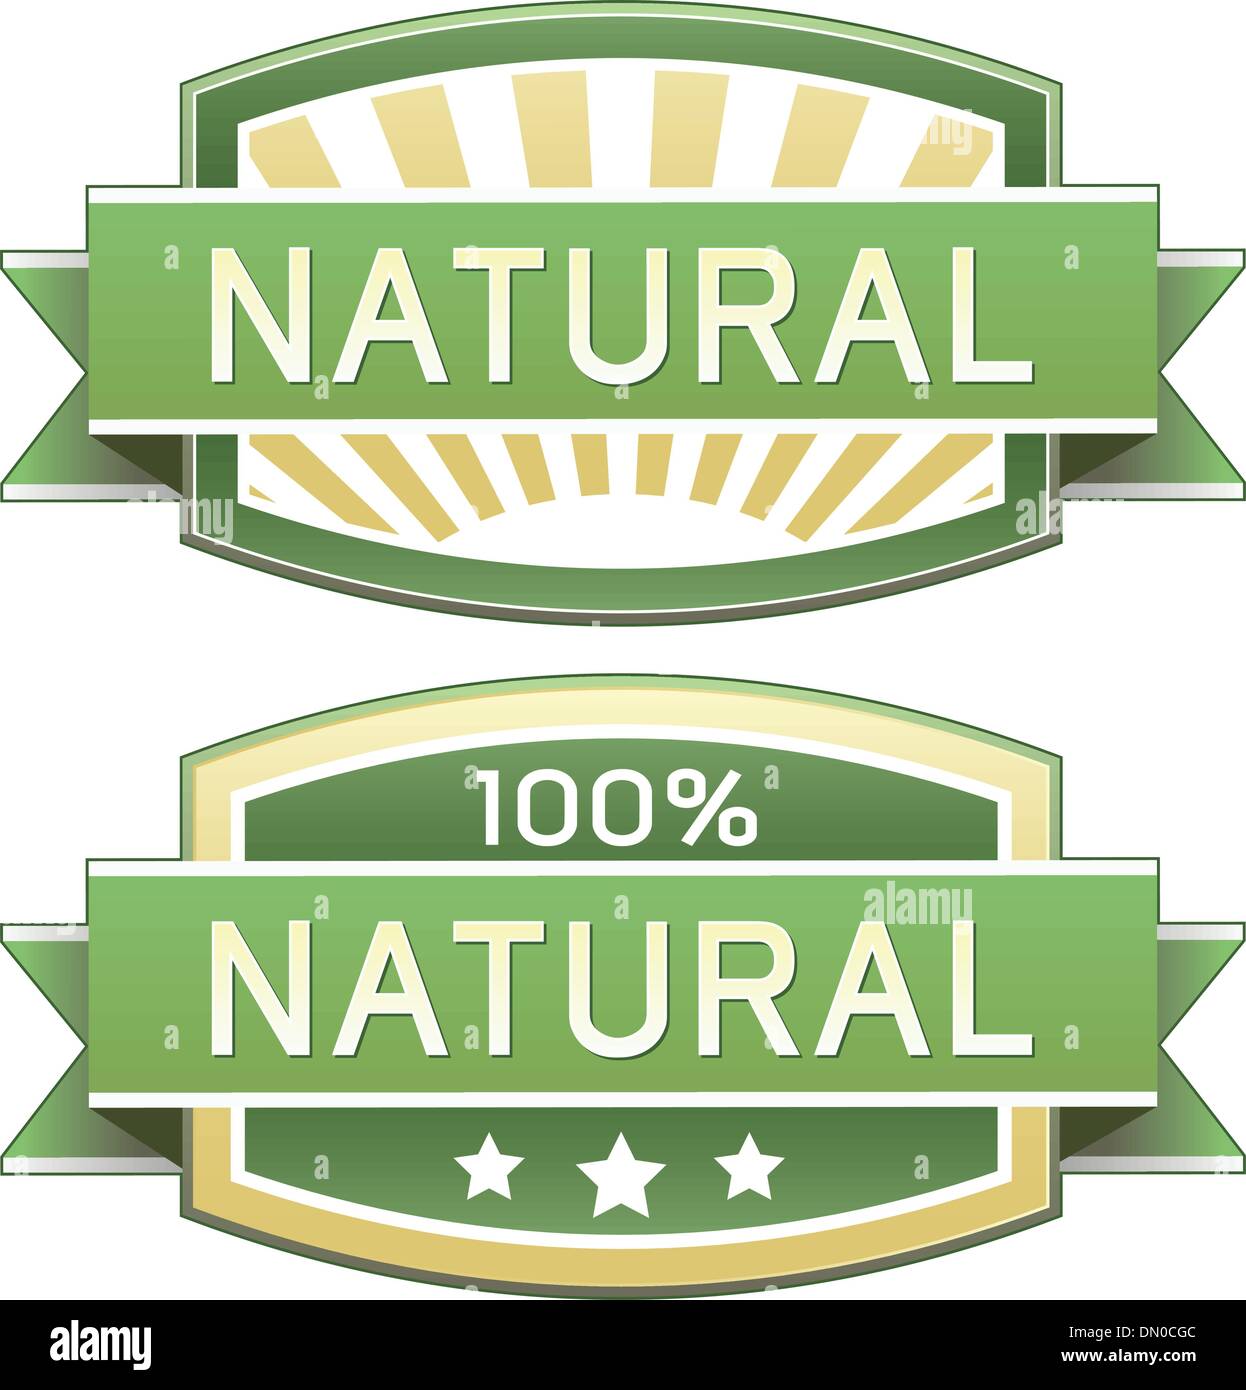 Natural food or product label Stock Vector